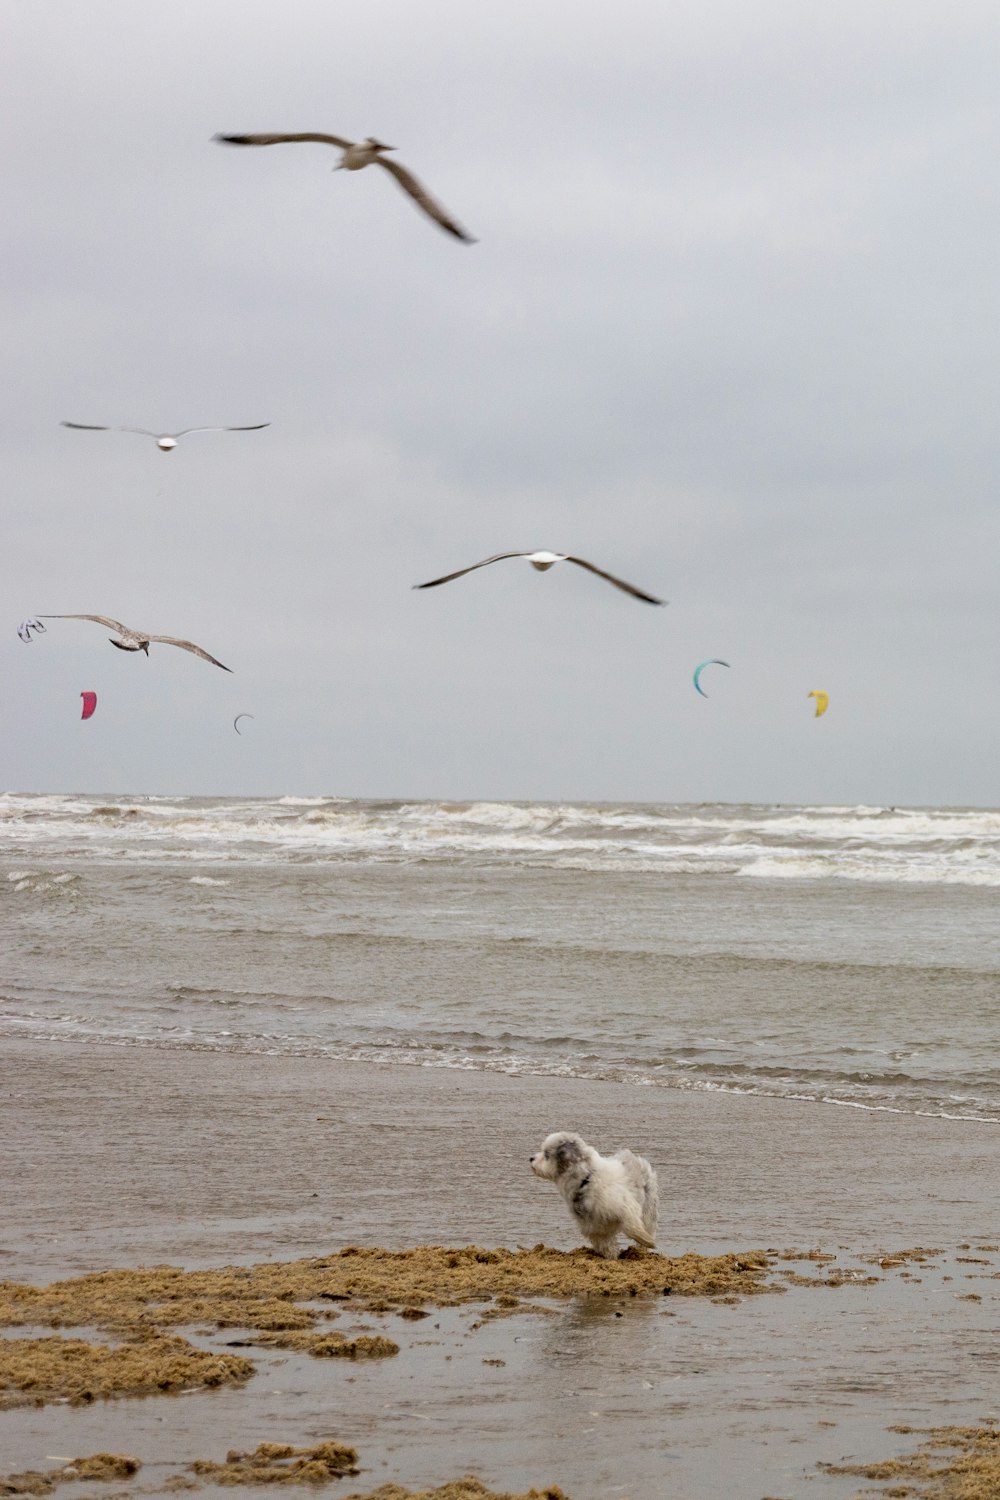 a dog on a beach with seagulls flying in the background